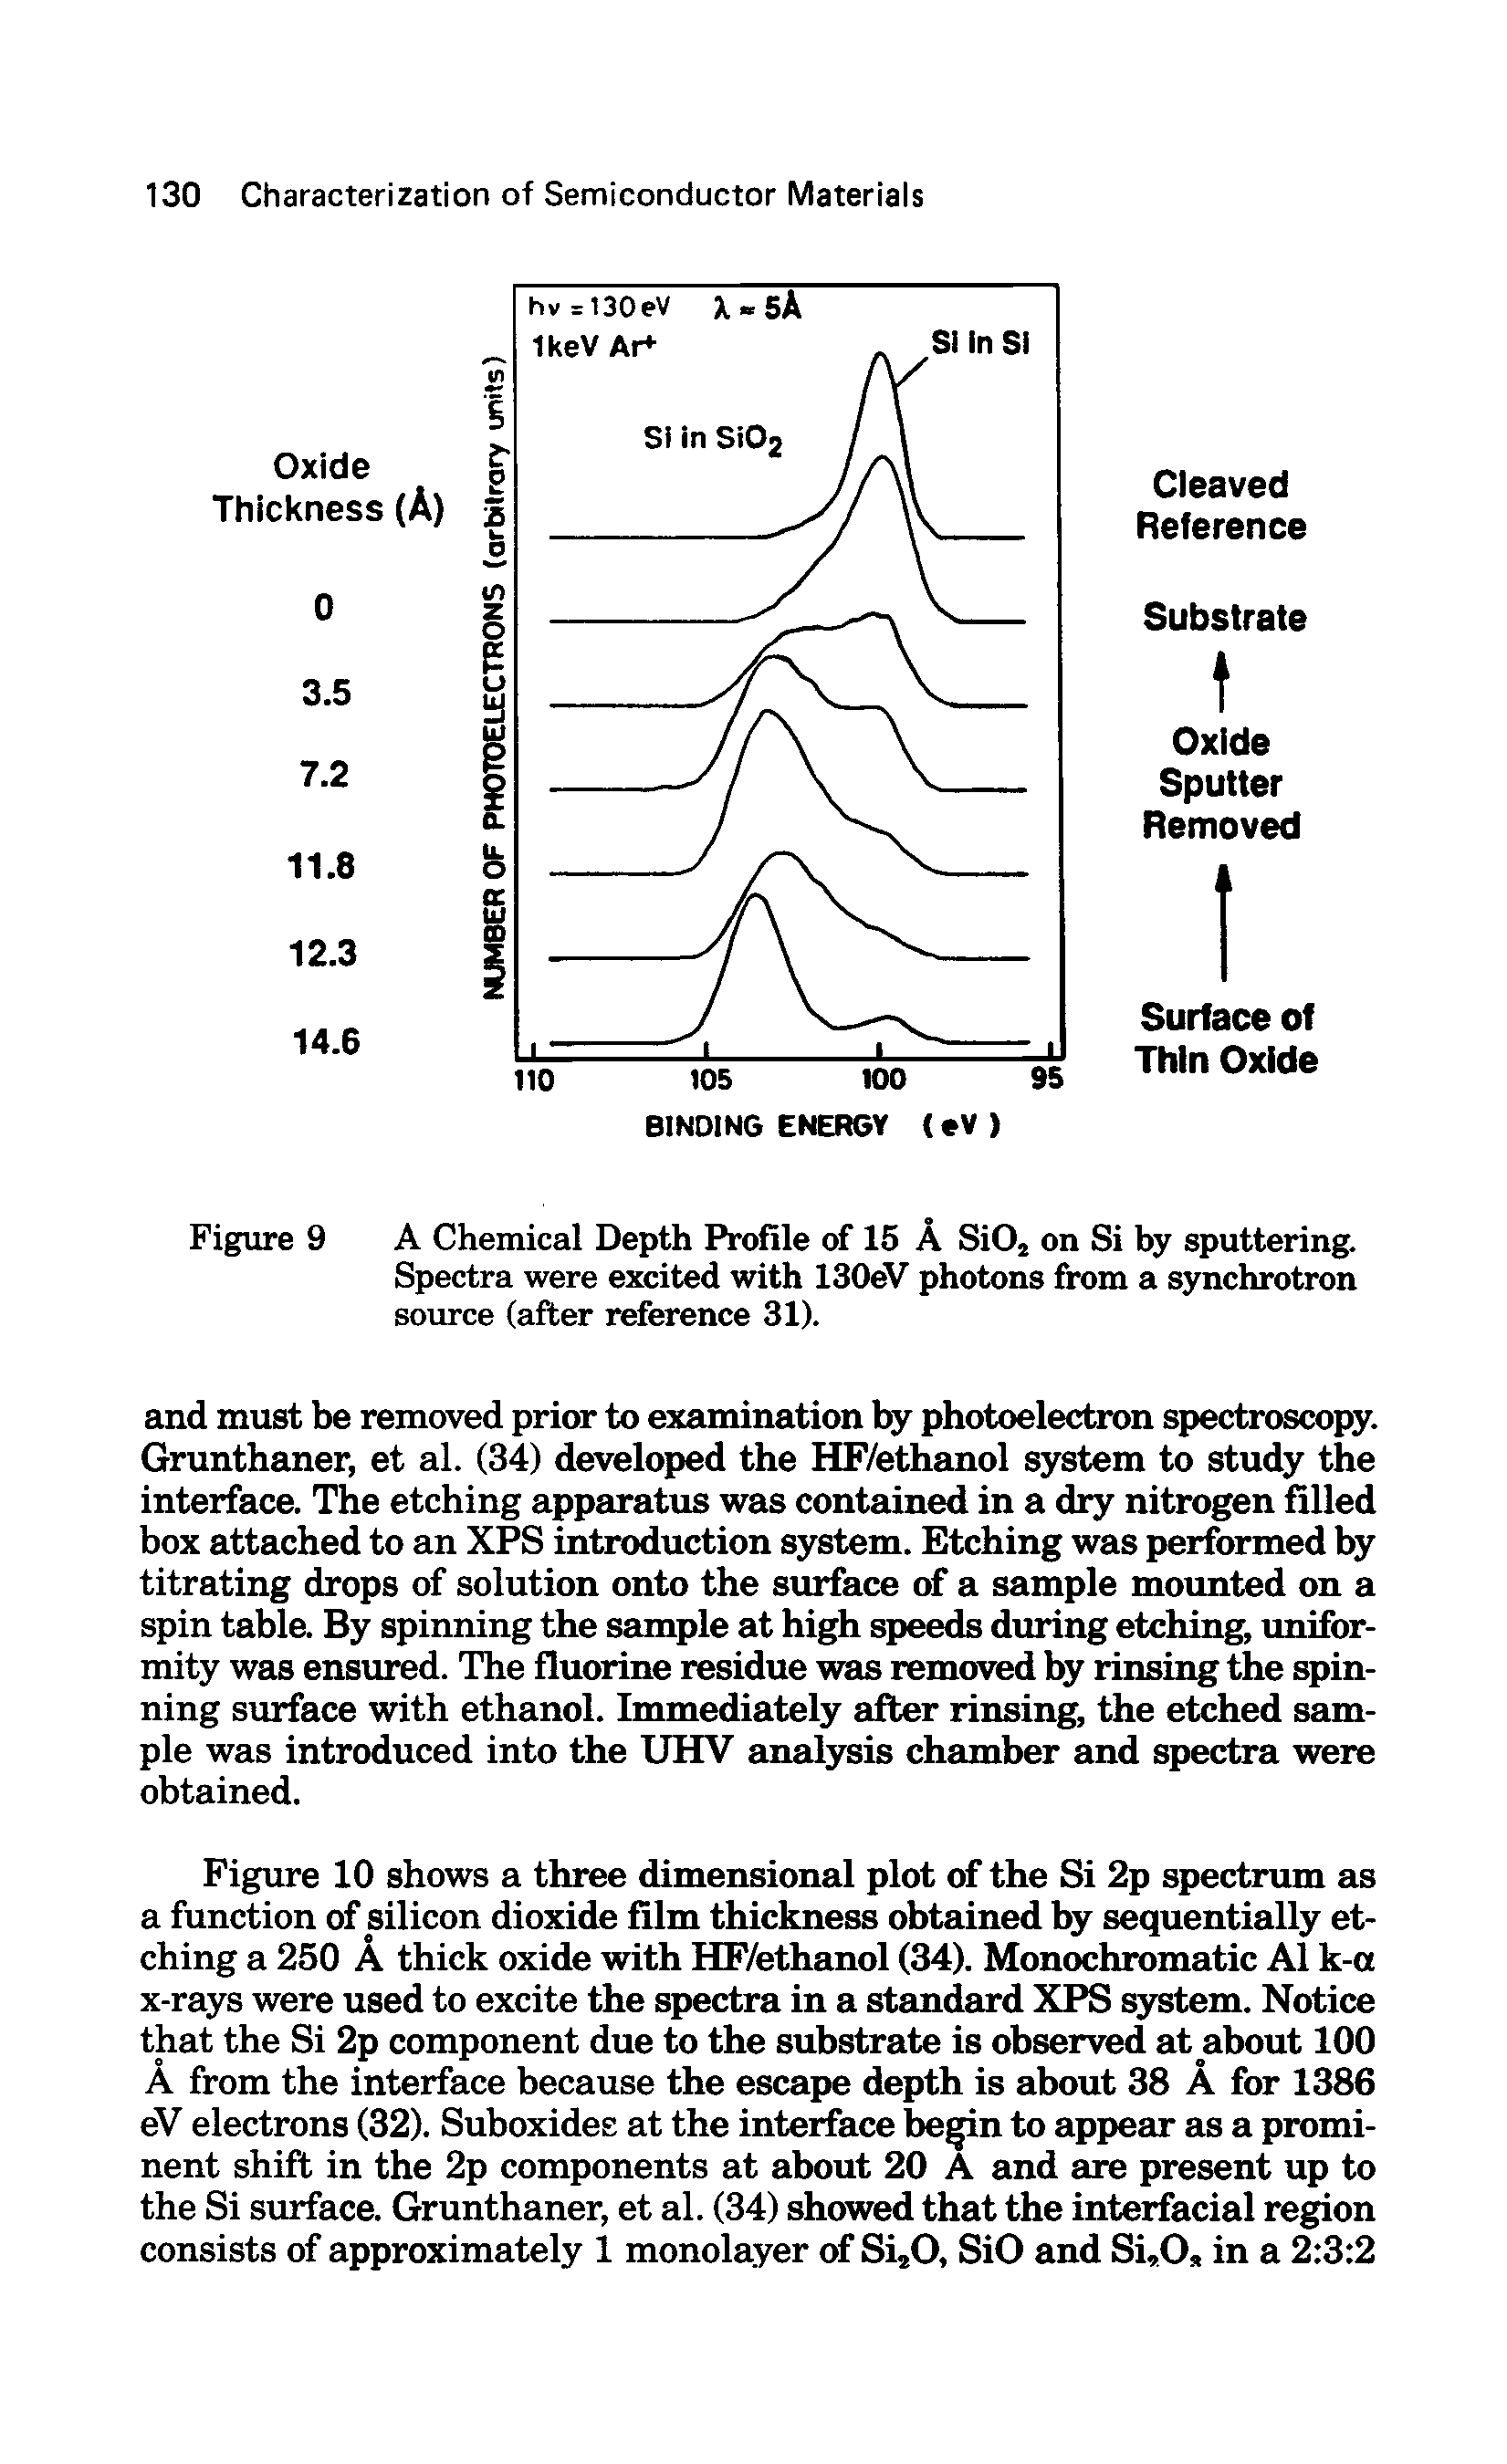 Figure 9 A Chemical Depth Profile of 15 A SiOj on Si by sputtering.